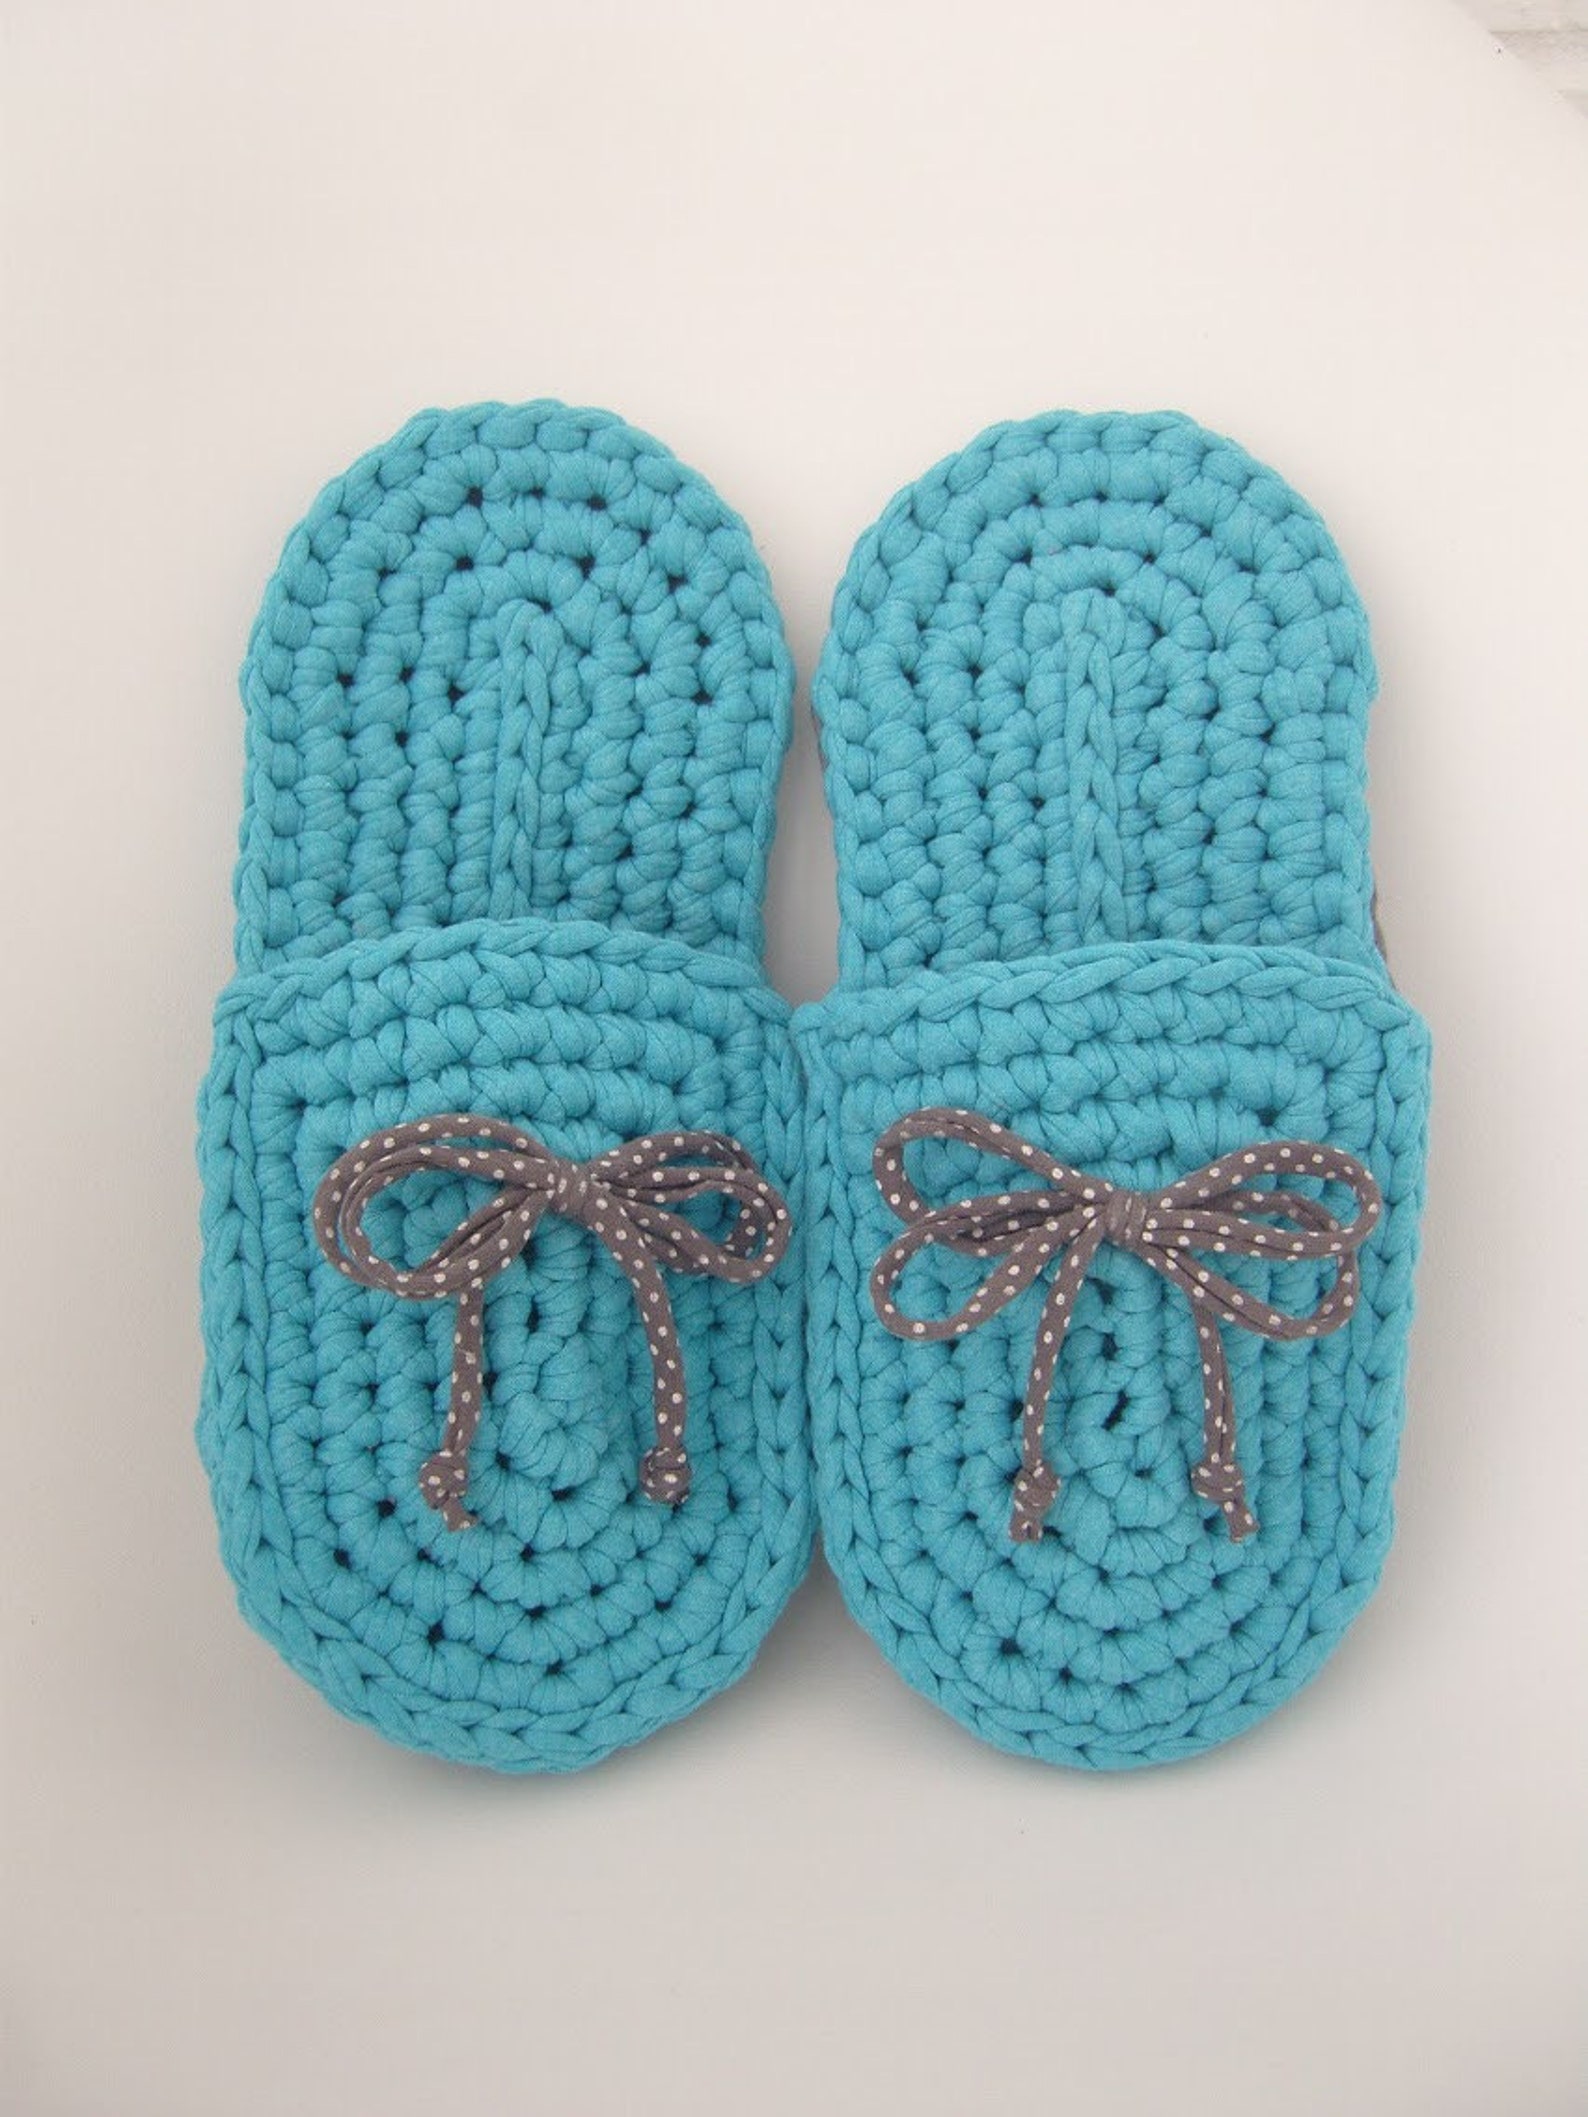 slippers / ballet shoes / knitted shoes / home ballet shoes/shoes for homе